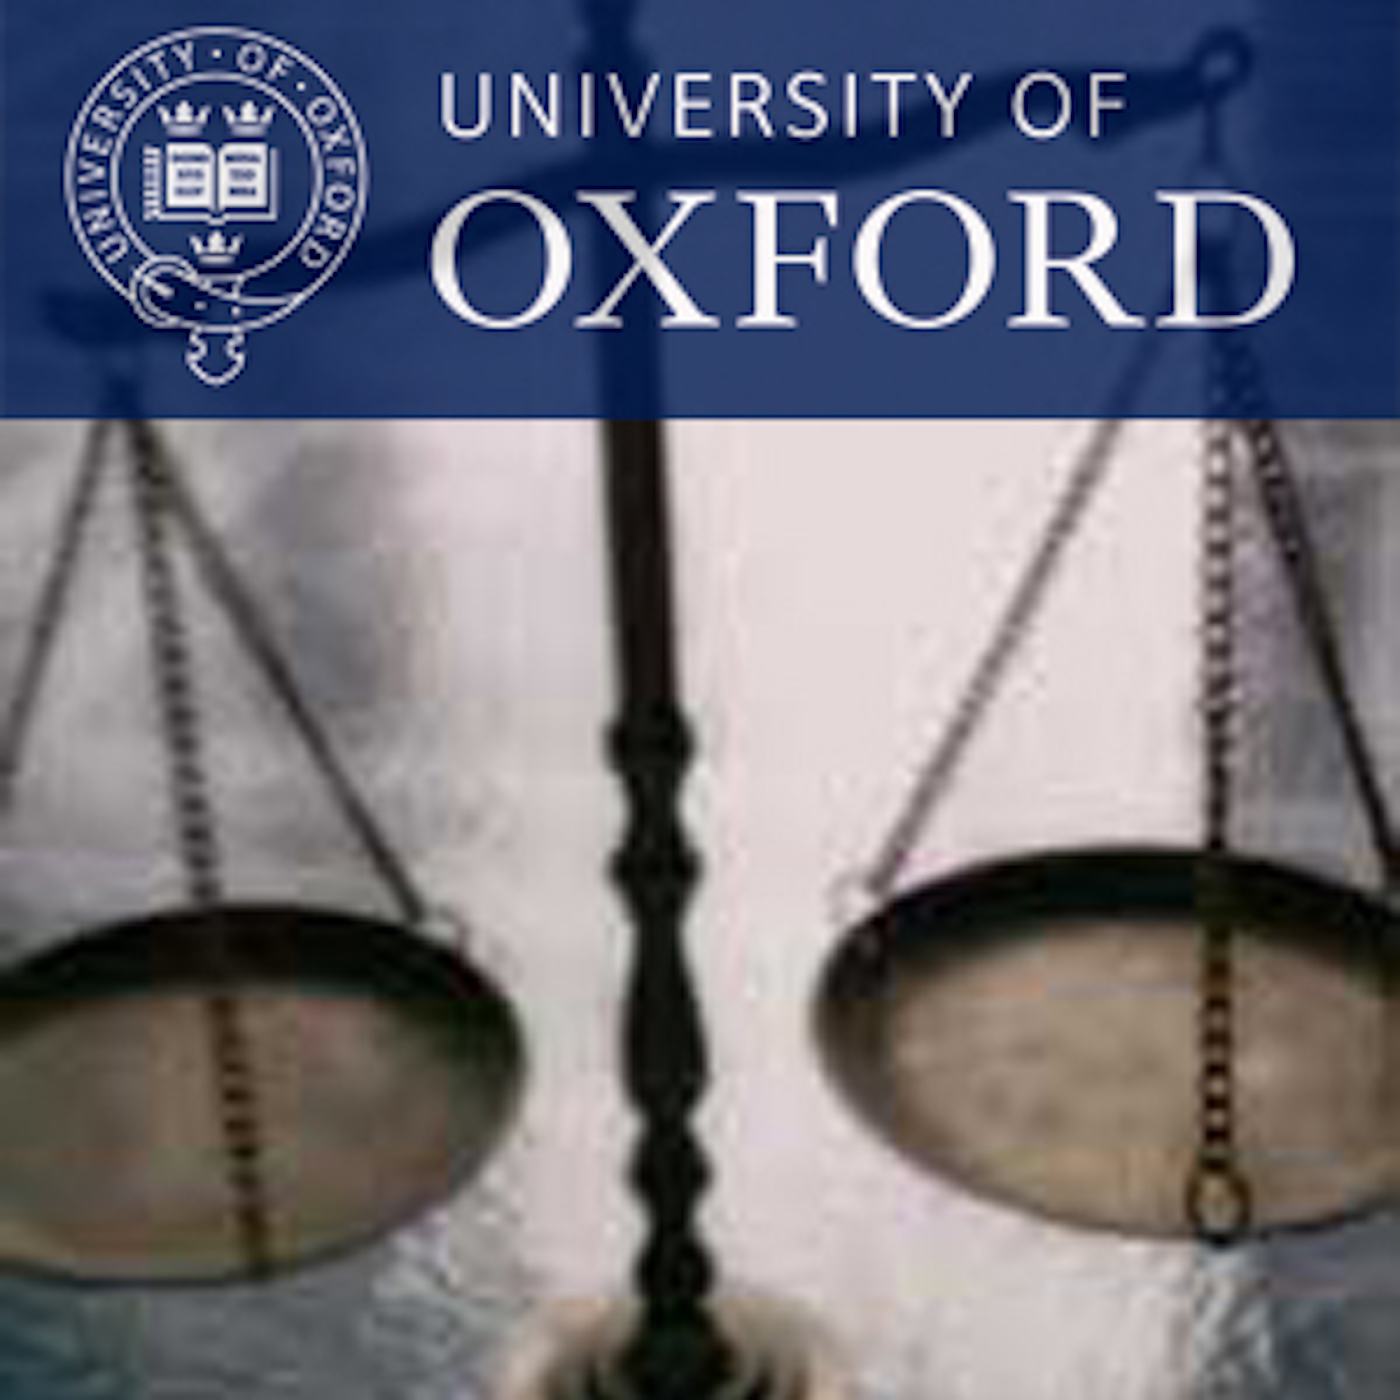 Oxford Transitional Justice Research (OTJR) conference podcasts